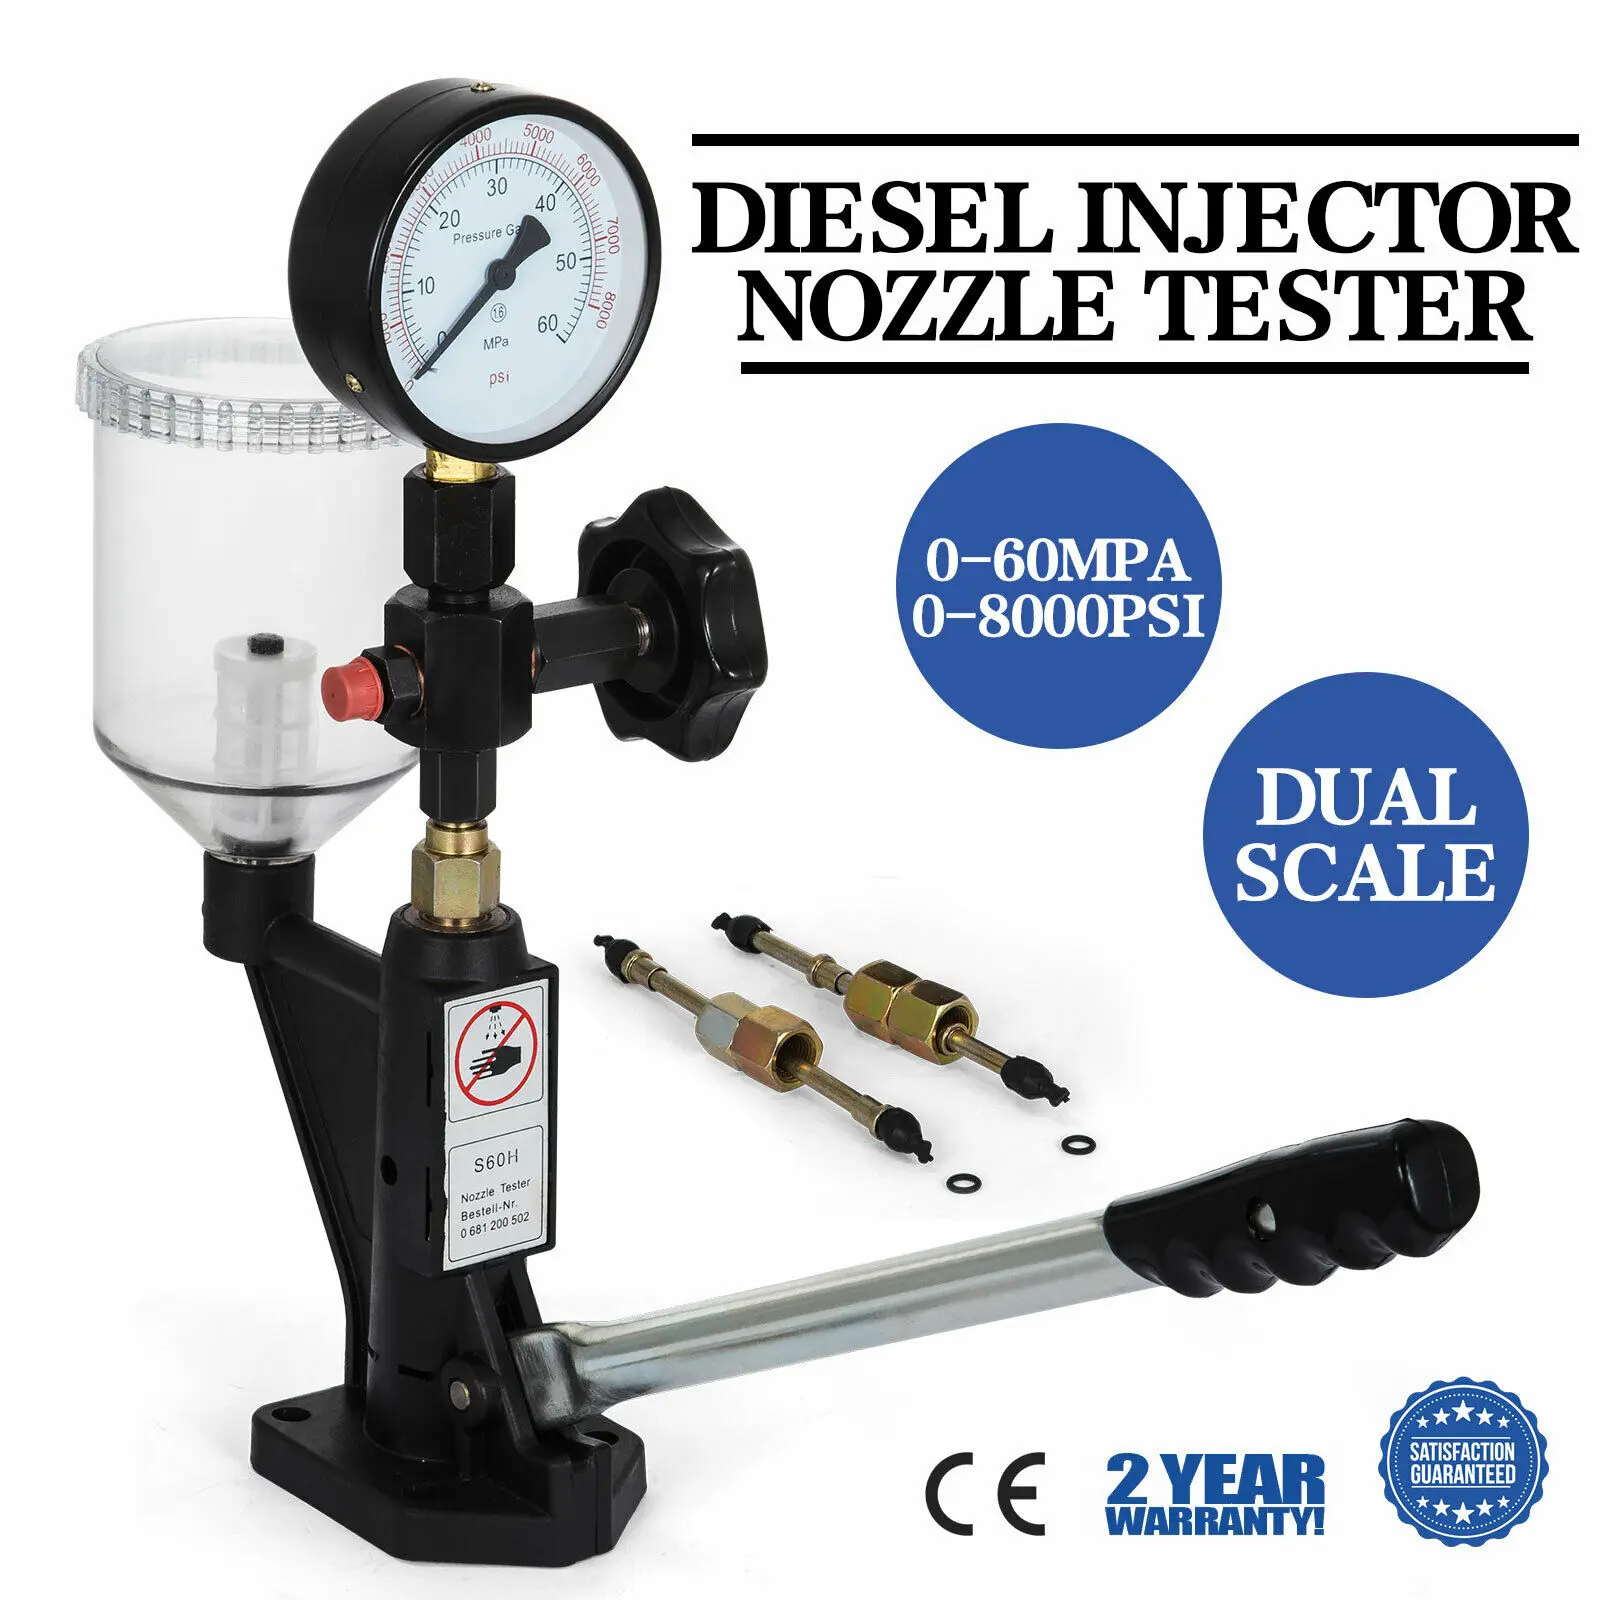 4000mL Diesel Injector Injection Nozzle Tester 0-600 Bar & 0-8000 PSI Gauge 